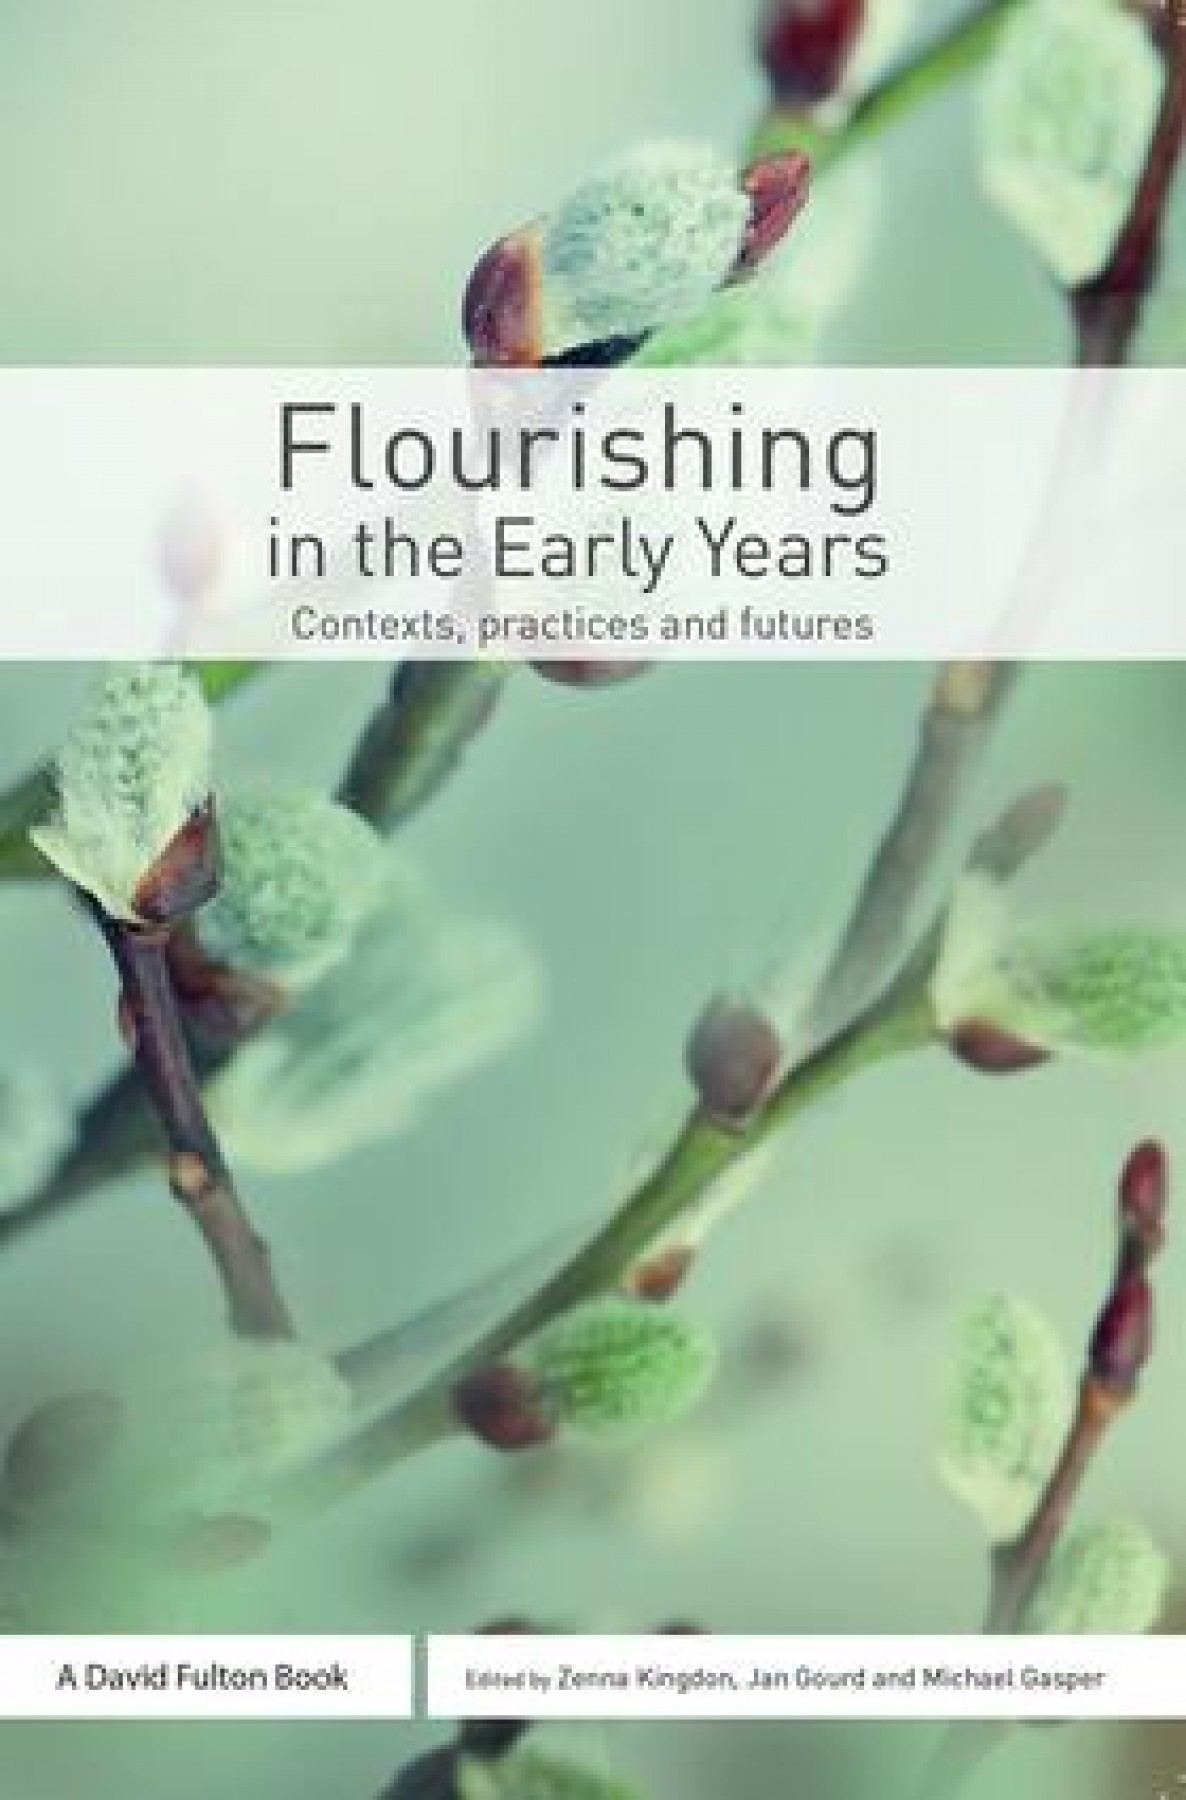 Flourishing in the early years: Contexts, practices and futures